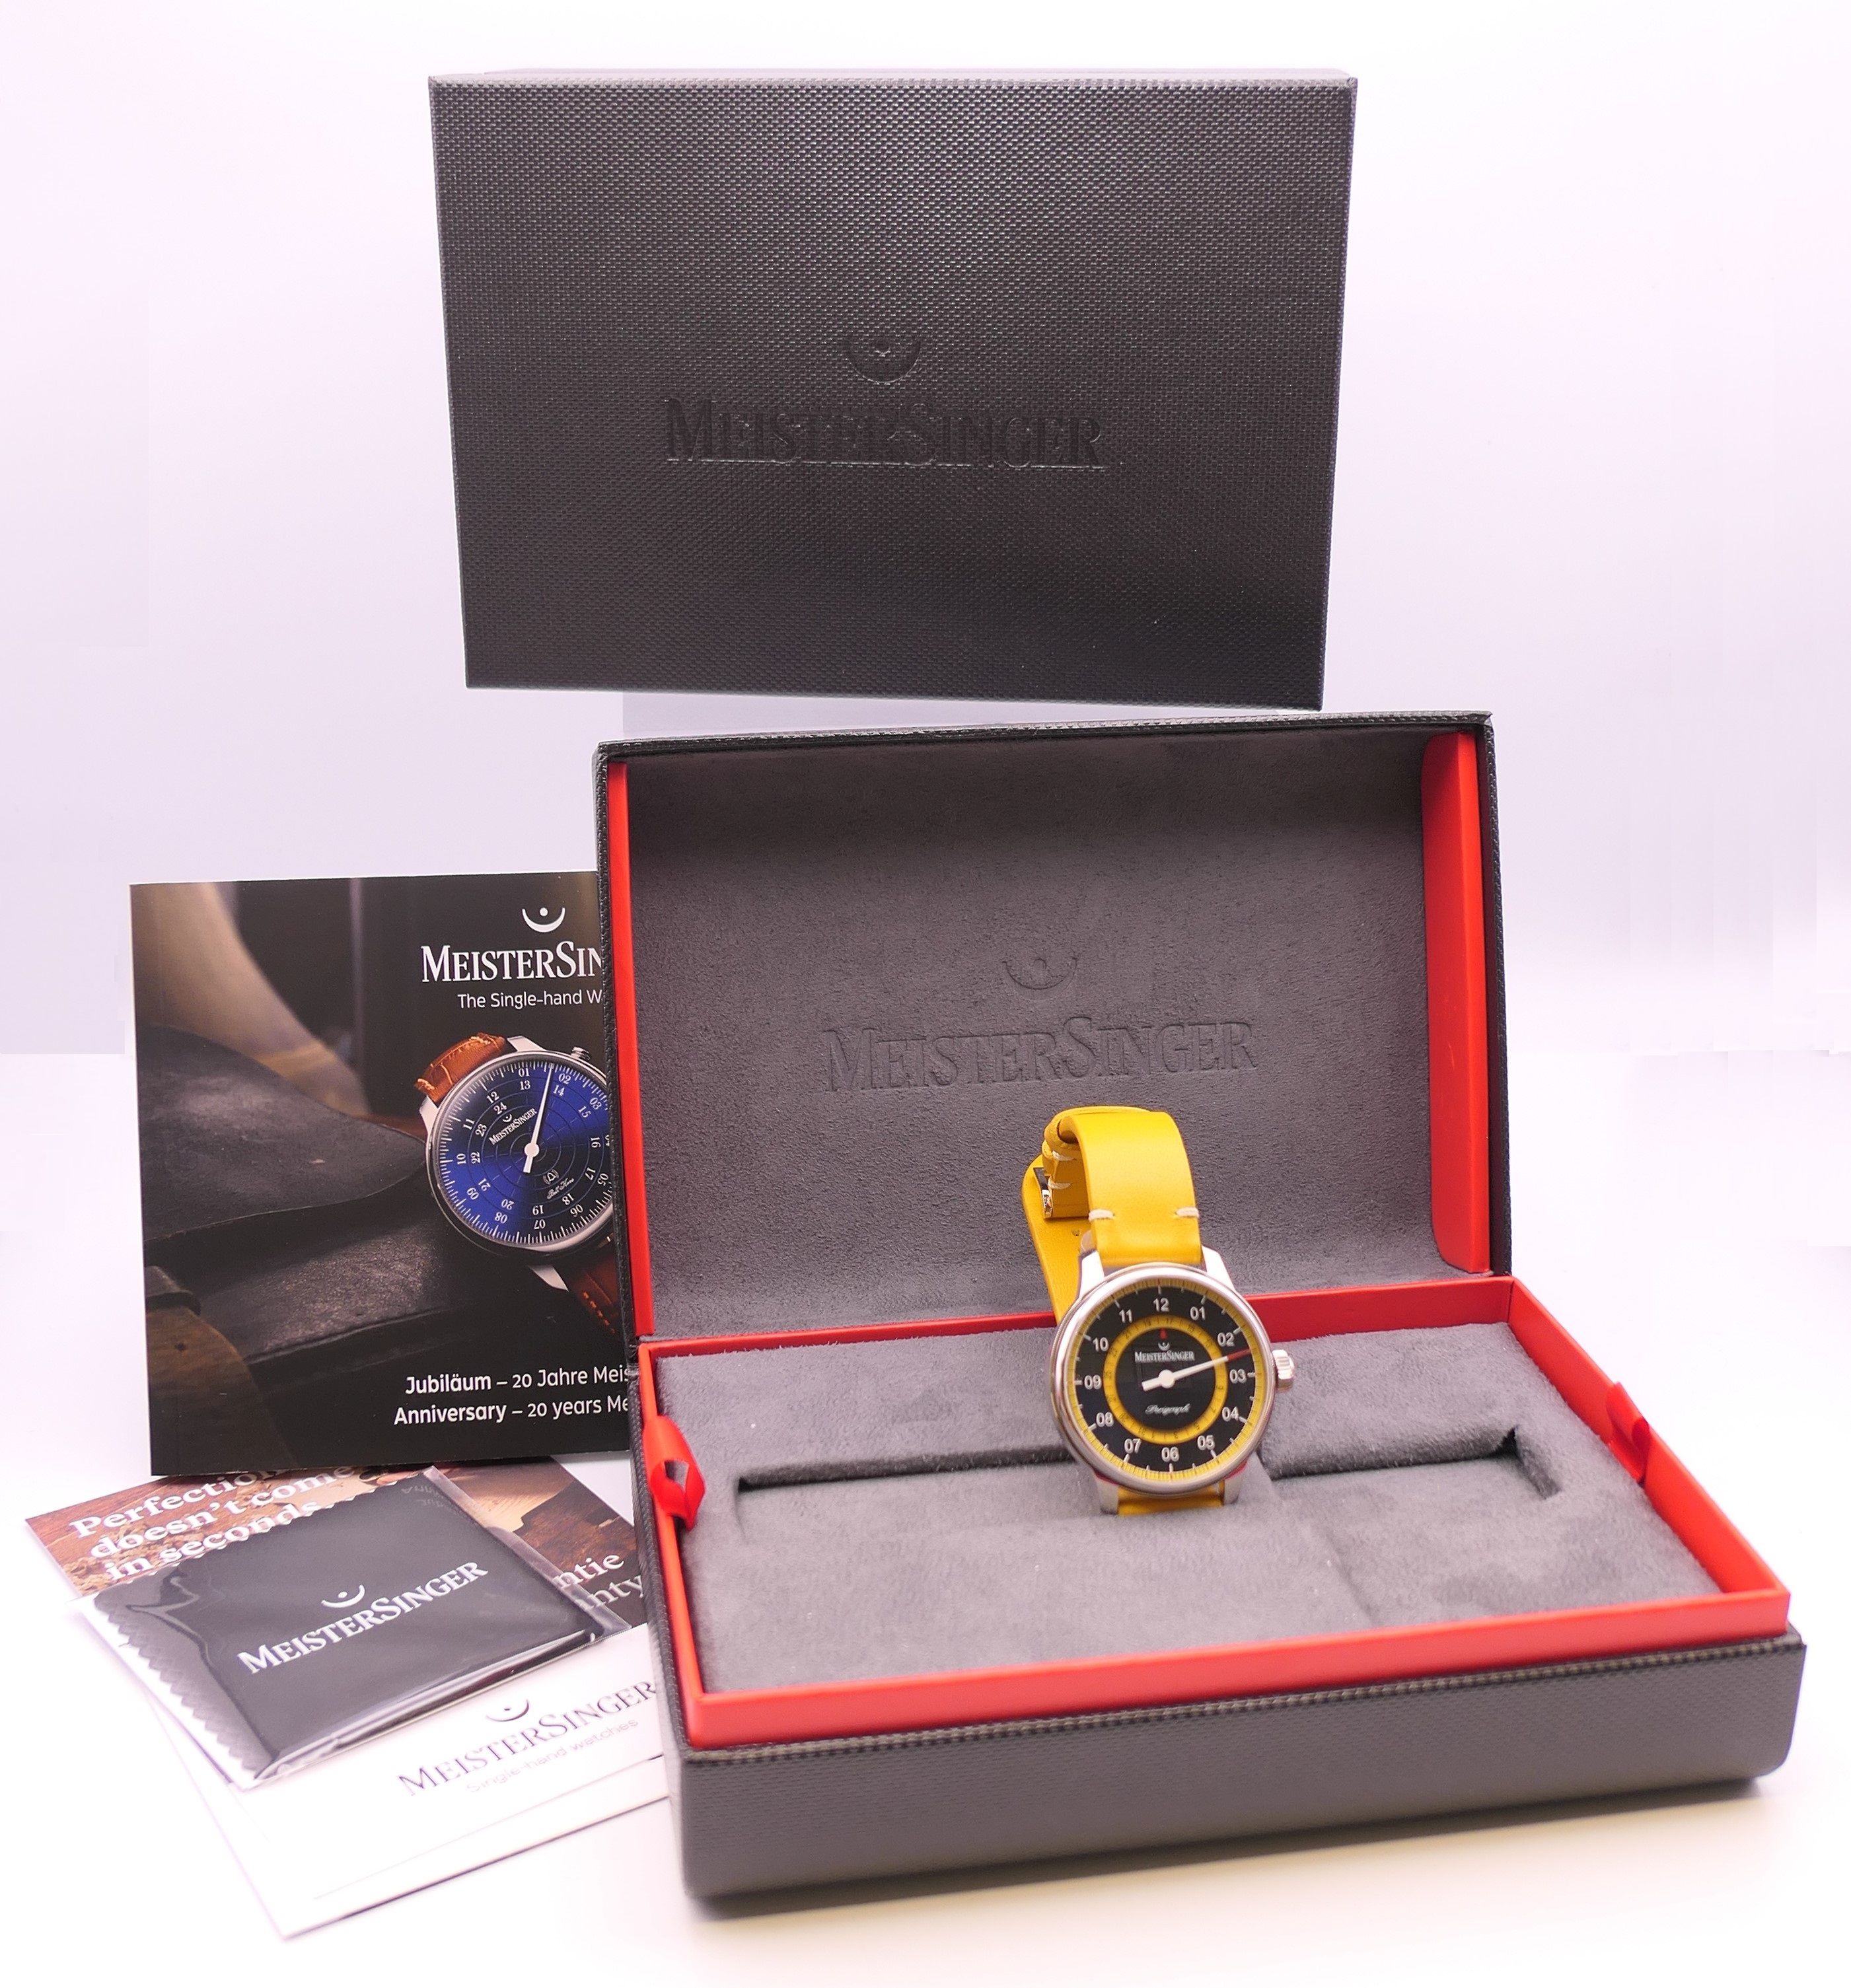 A boxed limited edition Meistersinger Perigraph gentleman's wristwatch. 4.5 cm wide. - Image 2 of 20